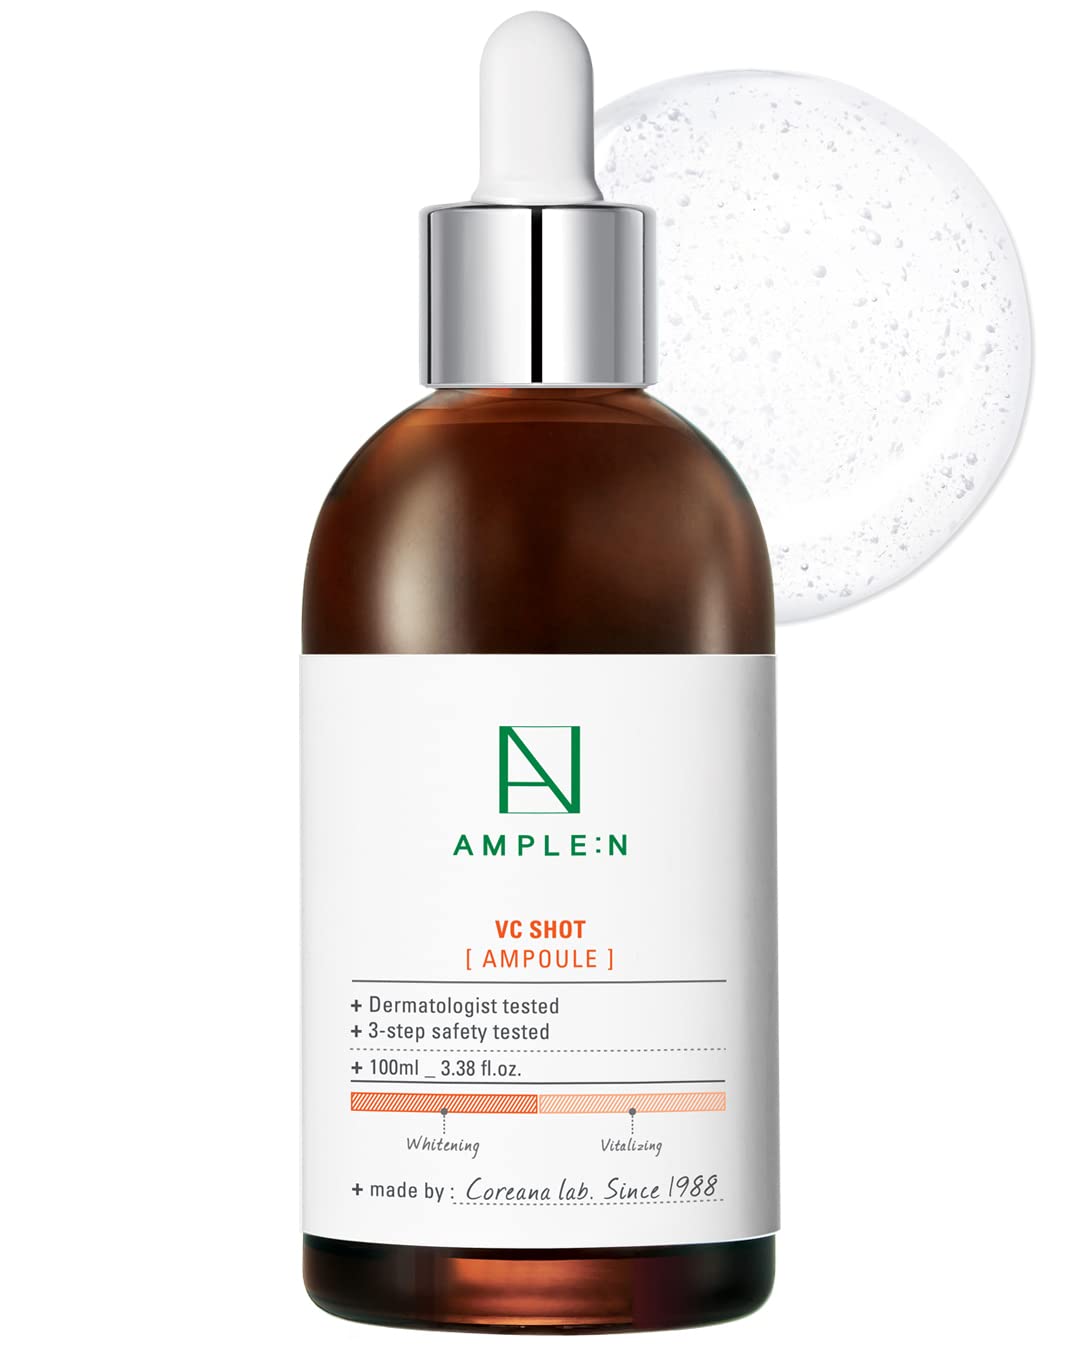 AMPLE:N VC Shot Ampoule - Anti-Aging Face Serum with Vitamin C – Evens Pigmentation and Aging Spots - Vitamin C Serum to Clear Skin of Sun Damage and Reduce Wrinkles, 3.38 .